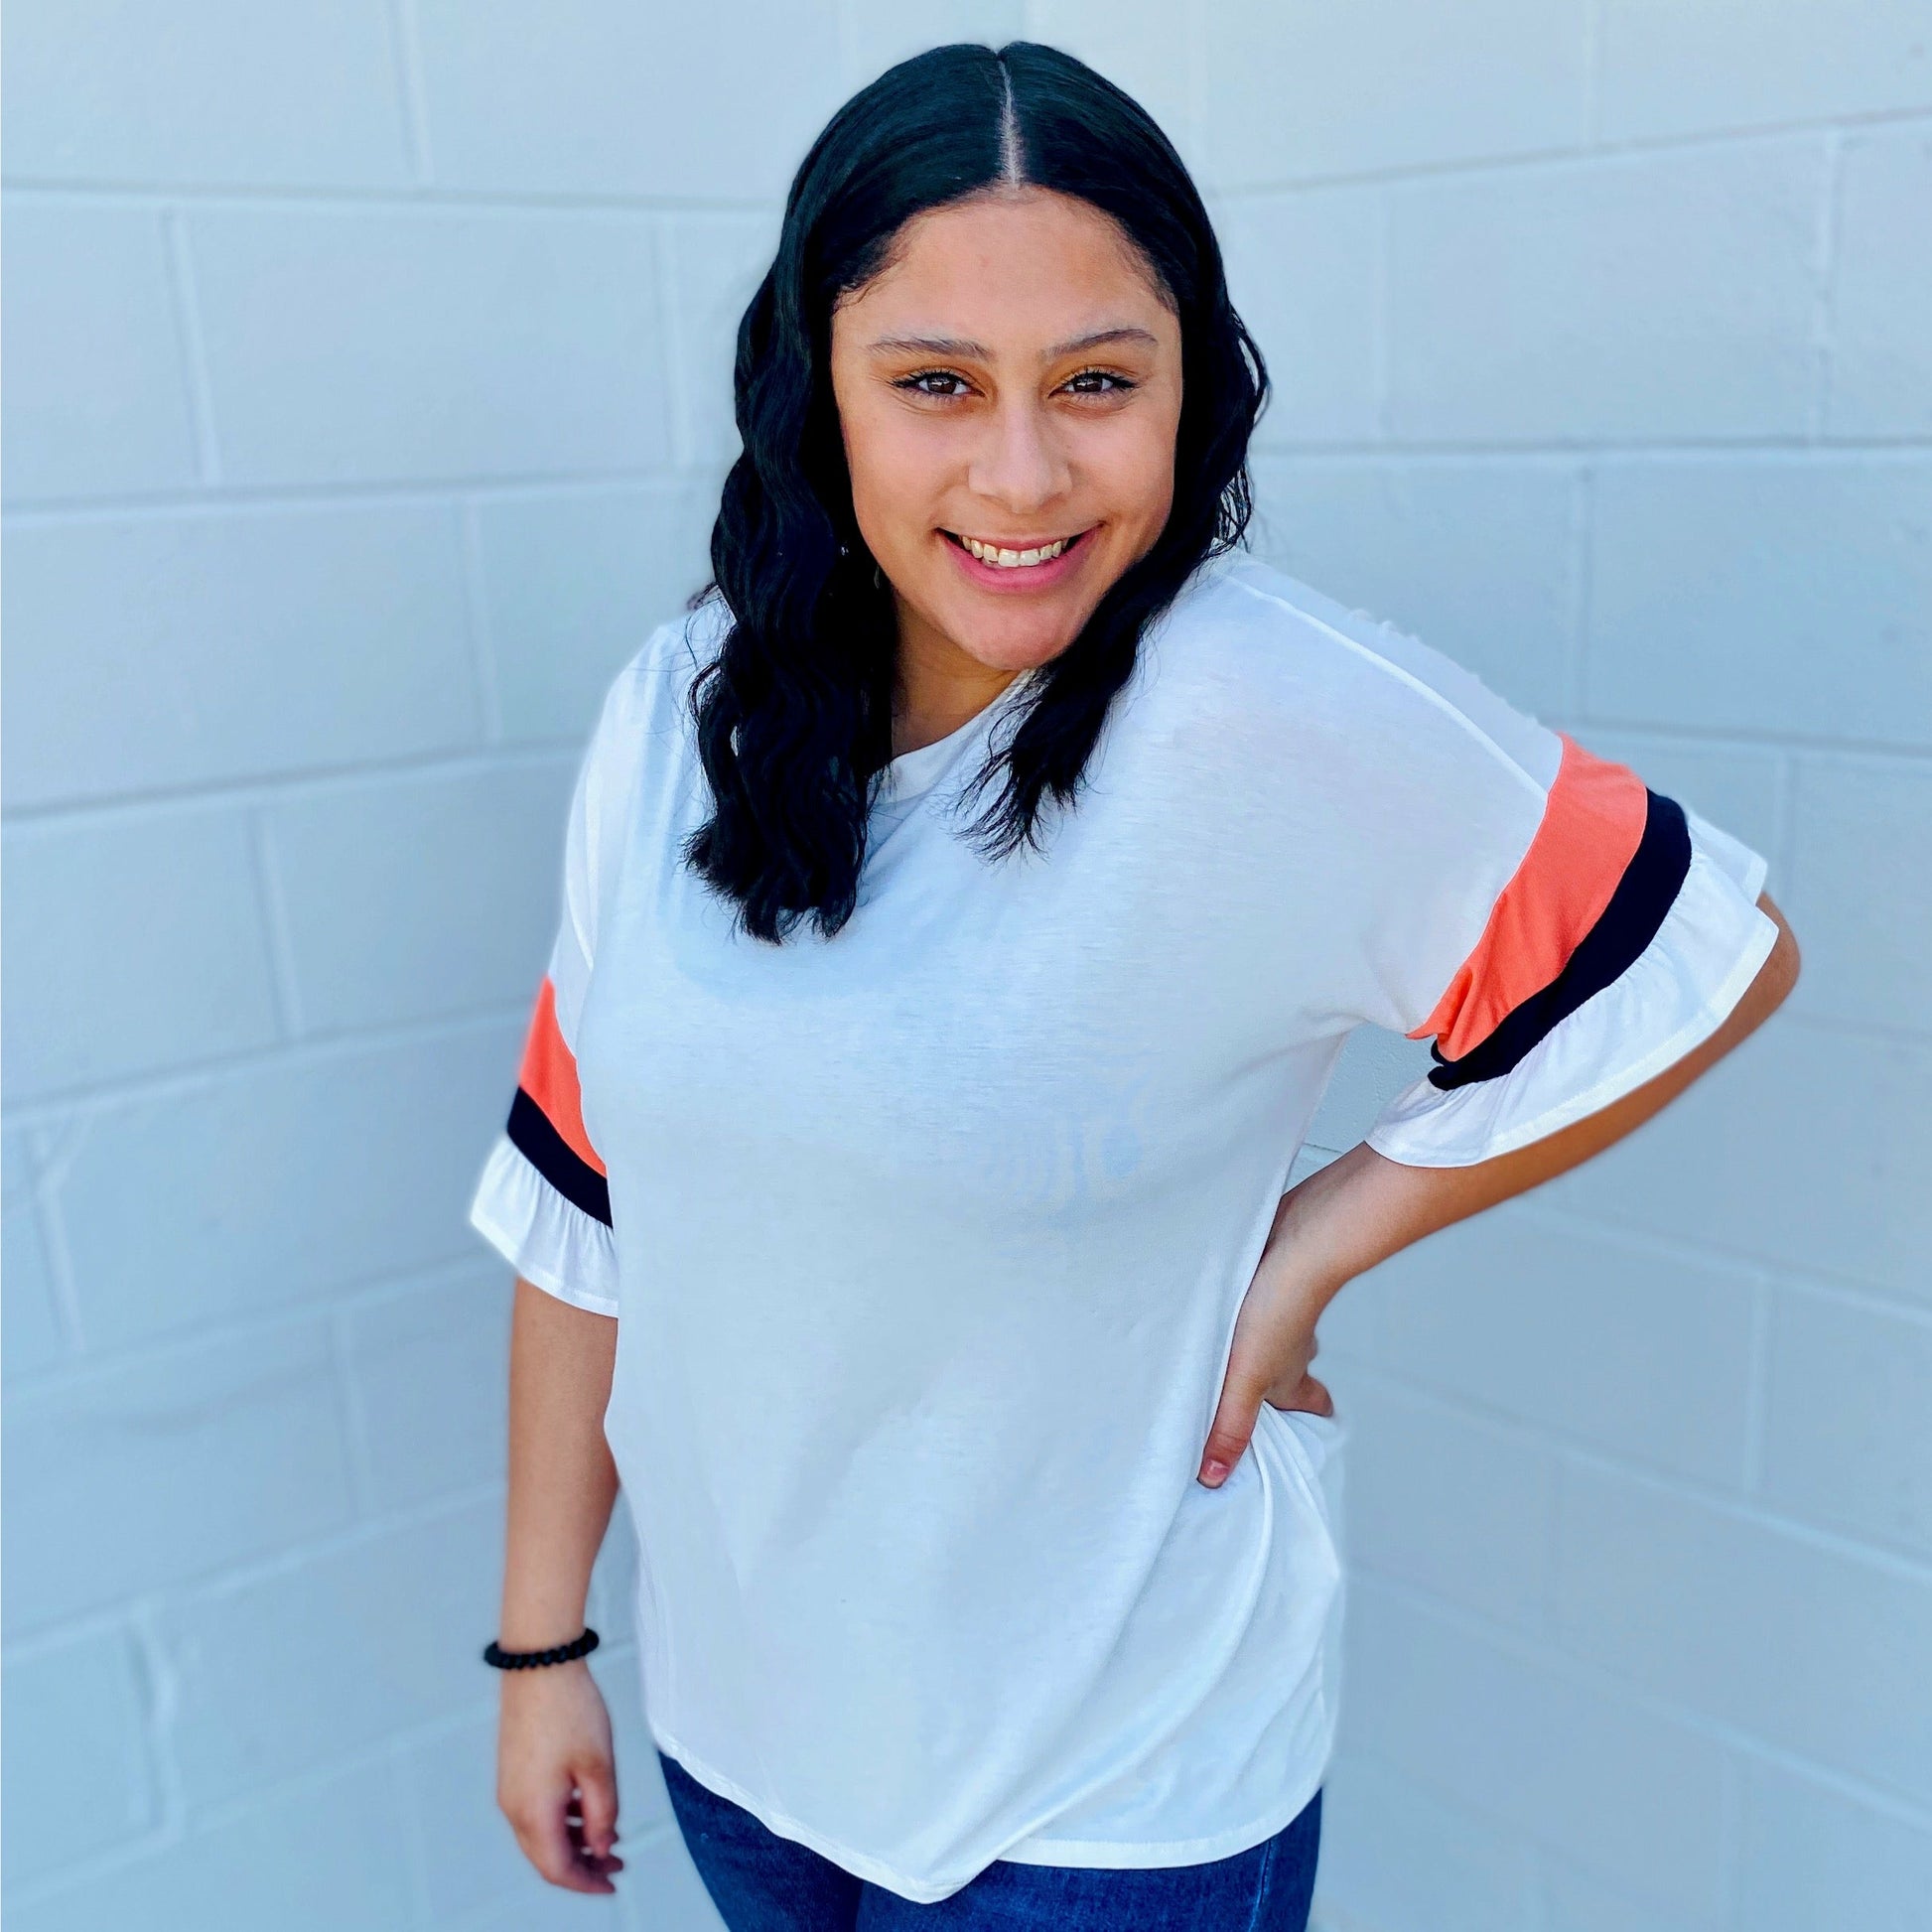 We all agree we love the sleeves on this top. Just the right amount of color detail. The navy and coral stripes on the sleeves really pop on the white base. This top features a round neck for comfort and ruffled sleeves in a soft jersey material.